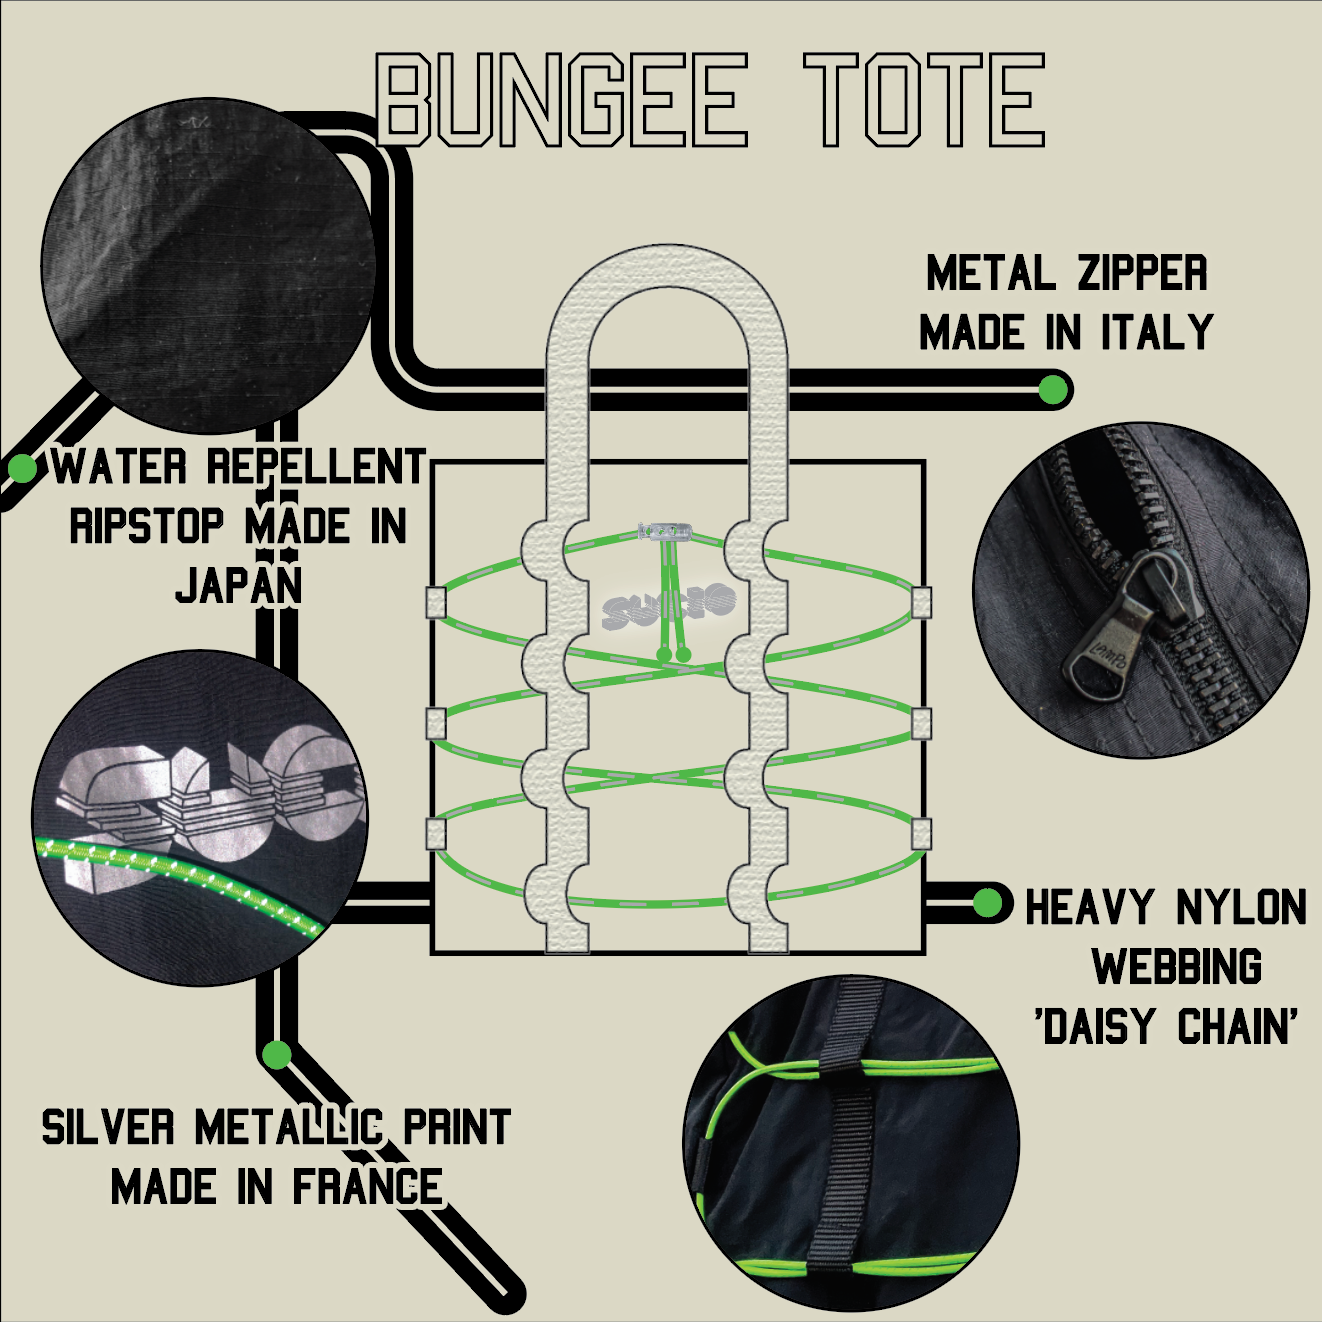 BUNGEE© TOTE